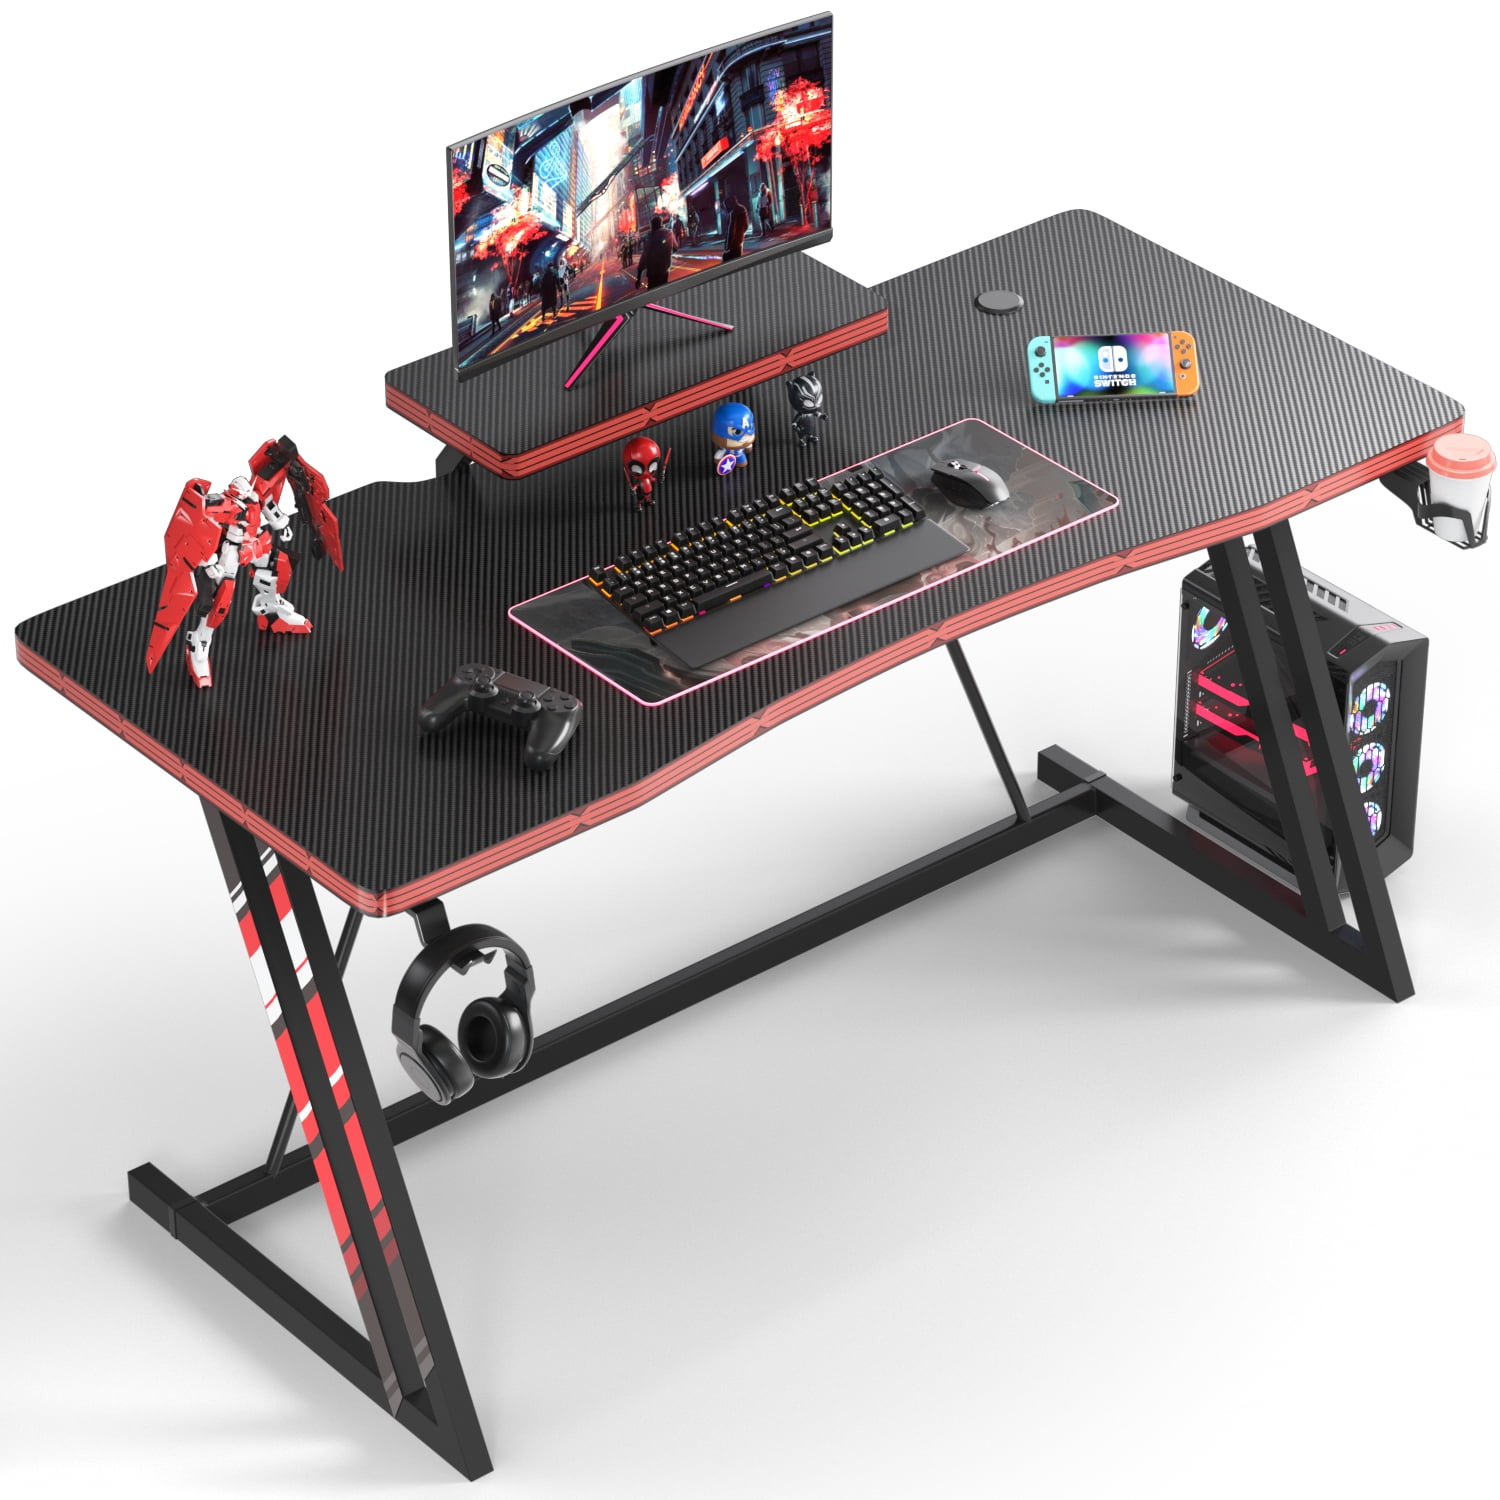 Details about   Gaming Desk 47.2" K-shape Home Office Computer PC Table w/Cup & Headphone Holder 